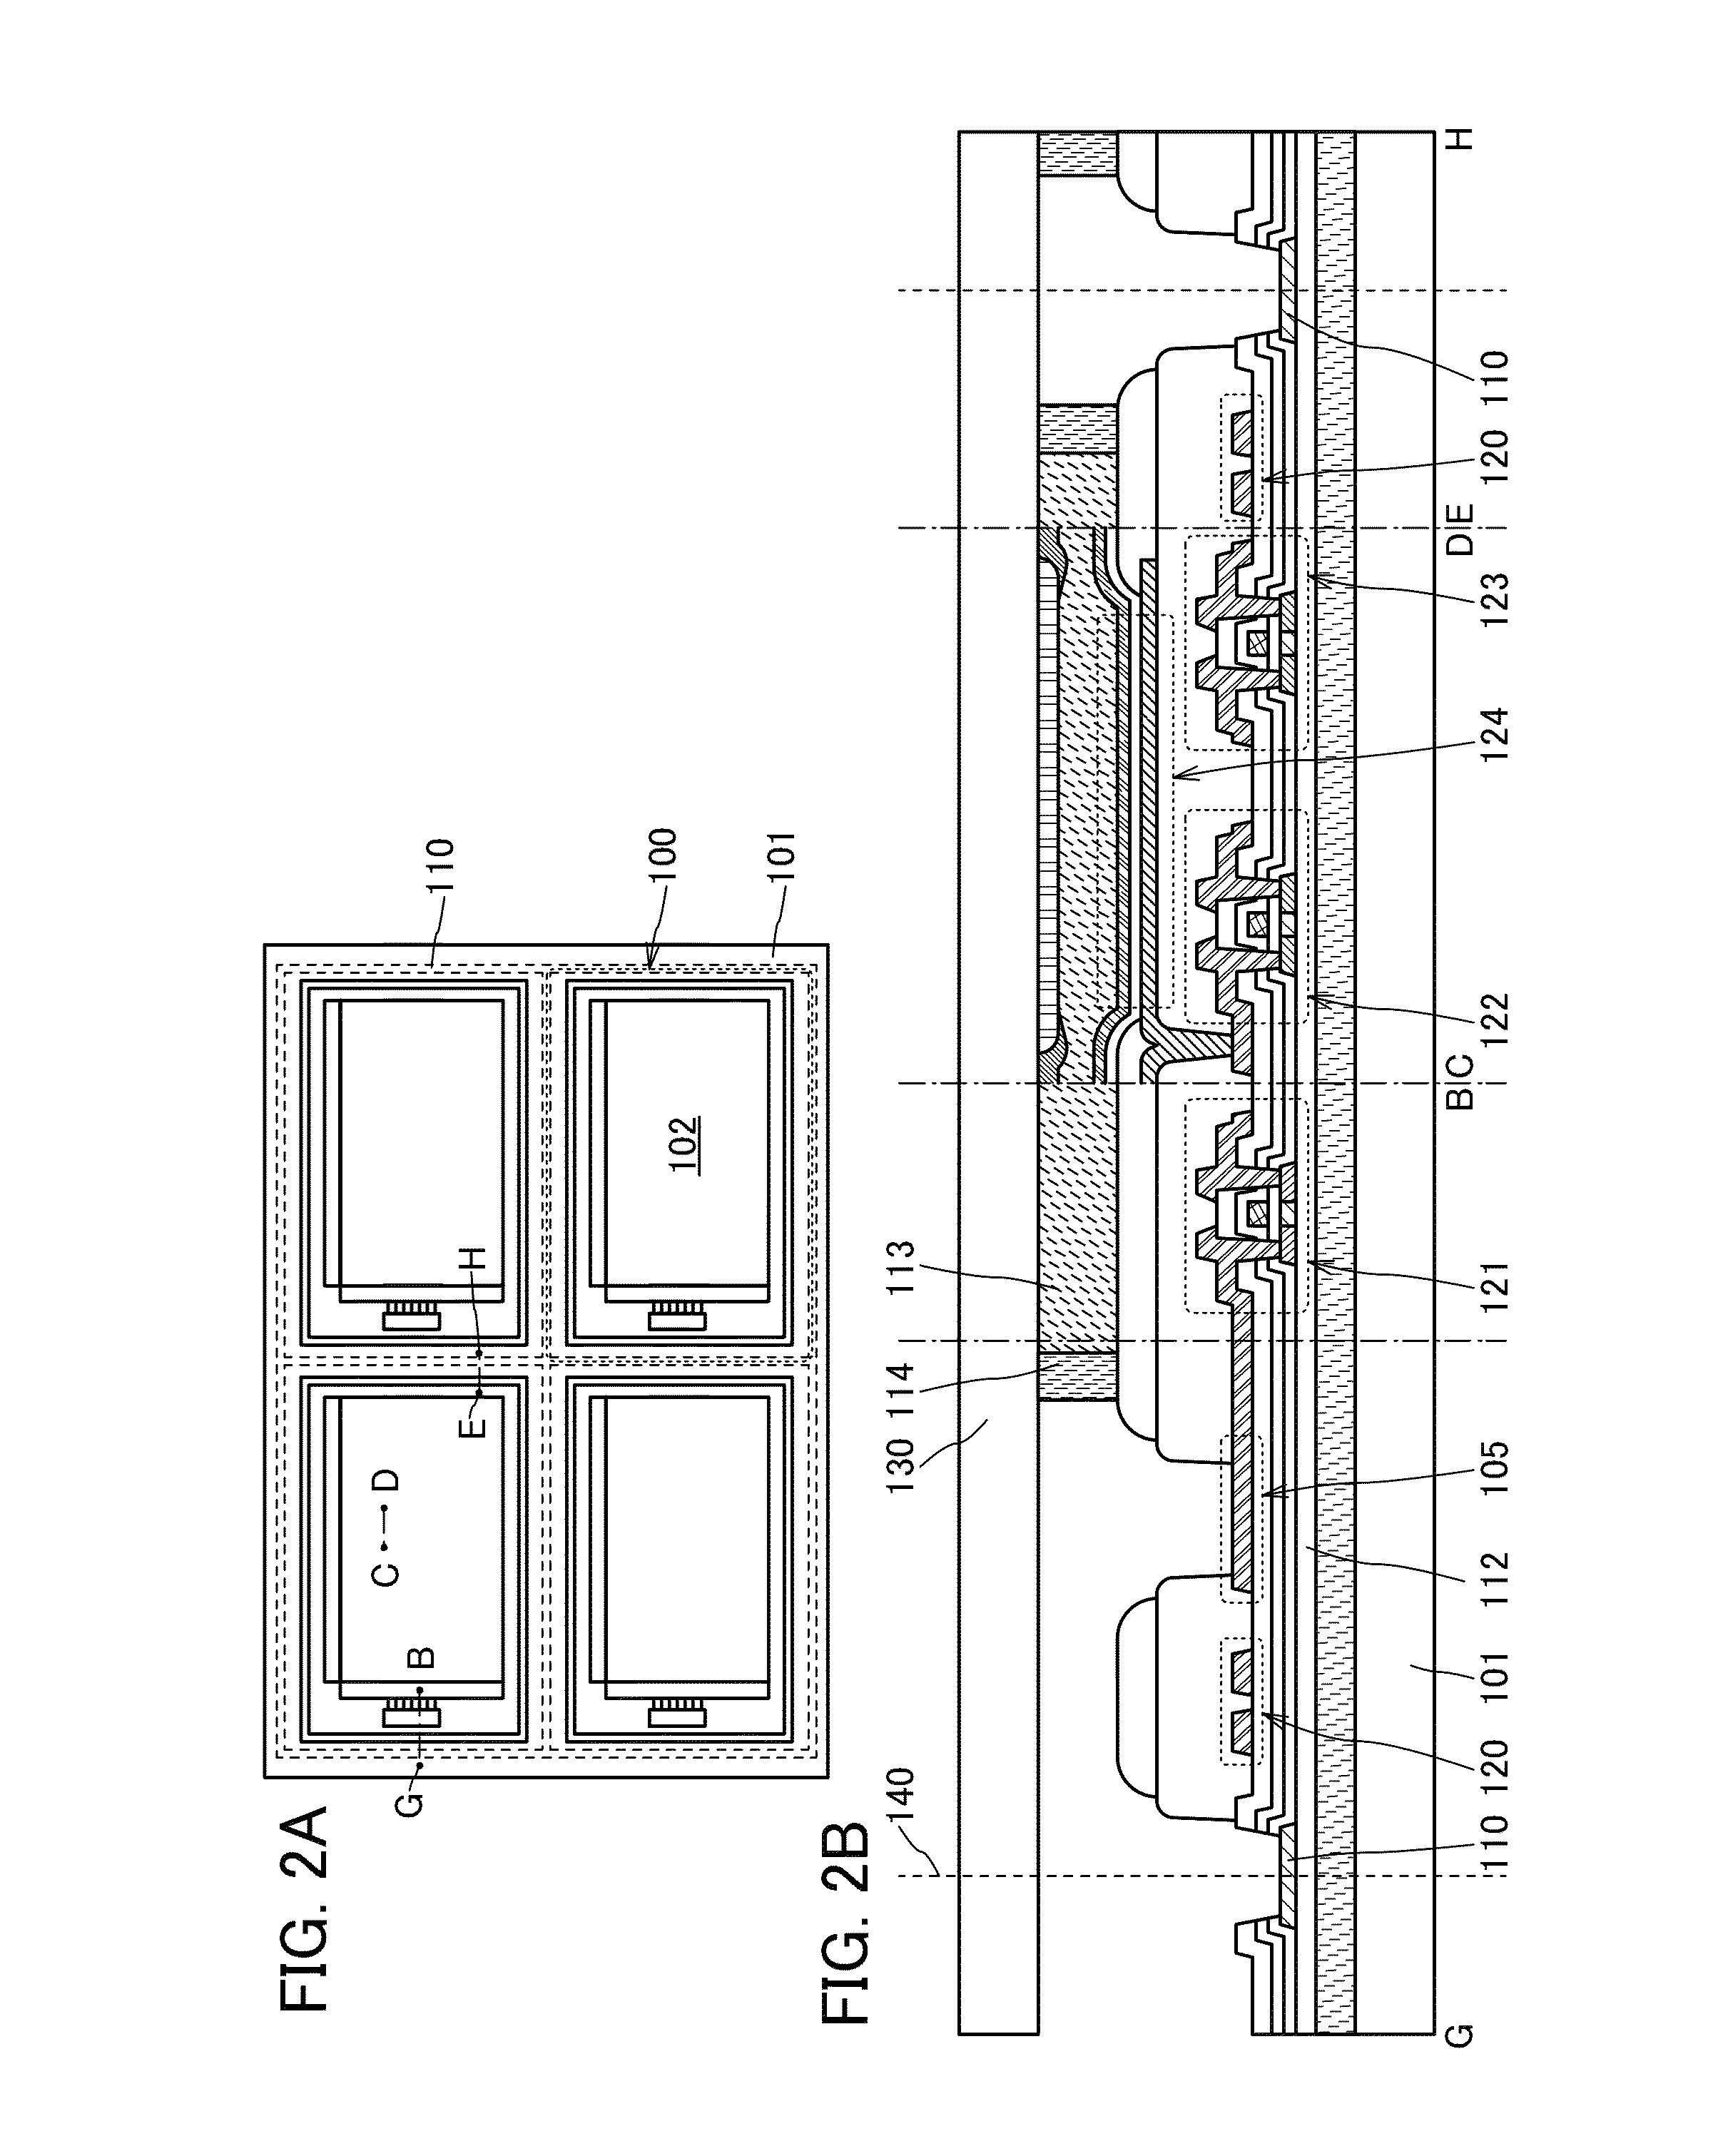 Method of semiconductor device including step of cutting substrate at opening of insulating layer